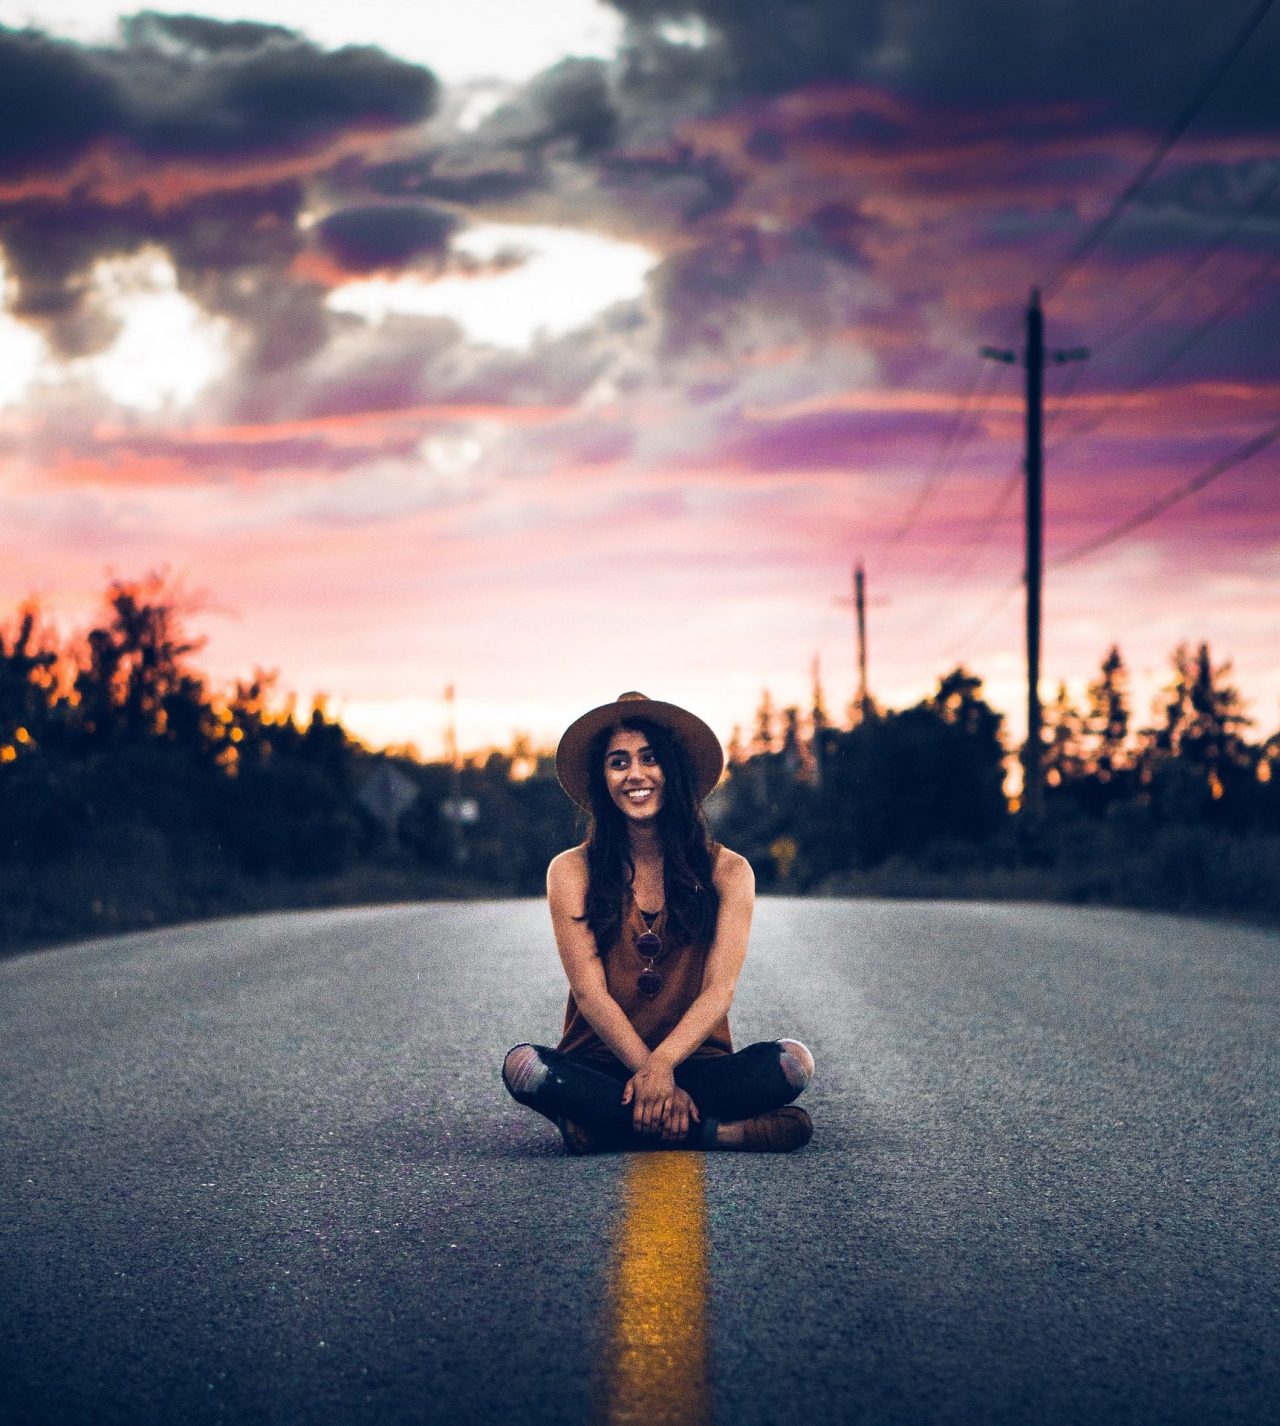 Wallpaper Alone But Happy Girl Djiwallpaperco - Sitting In The Middle Of The Road - HD Wallpaper 